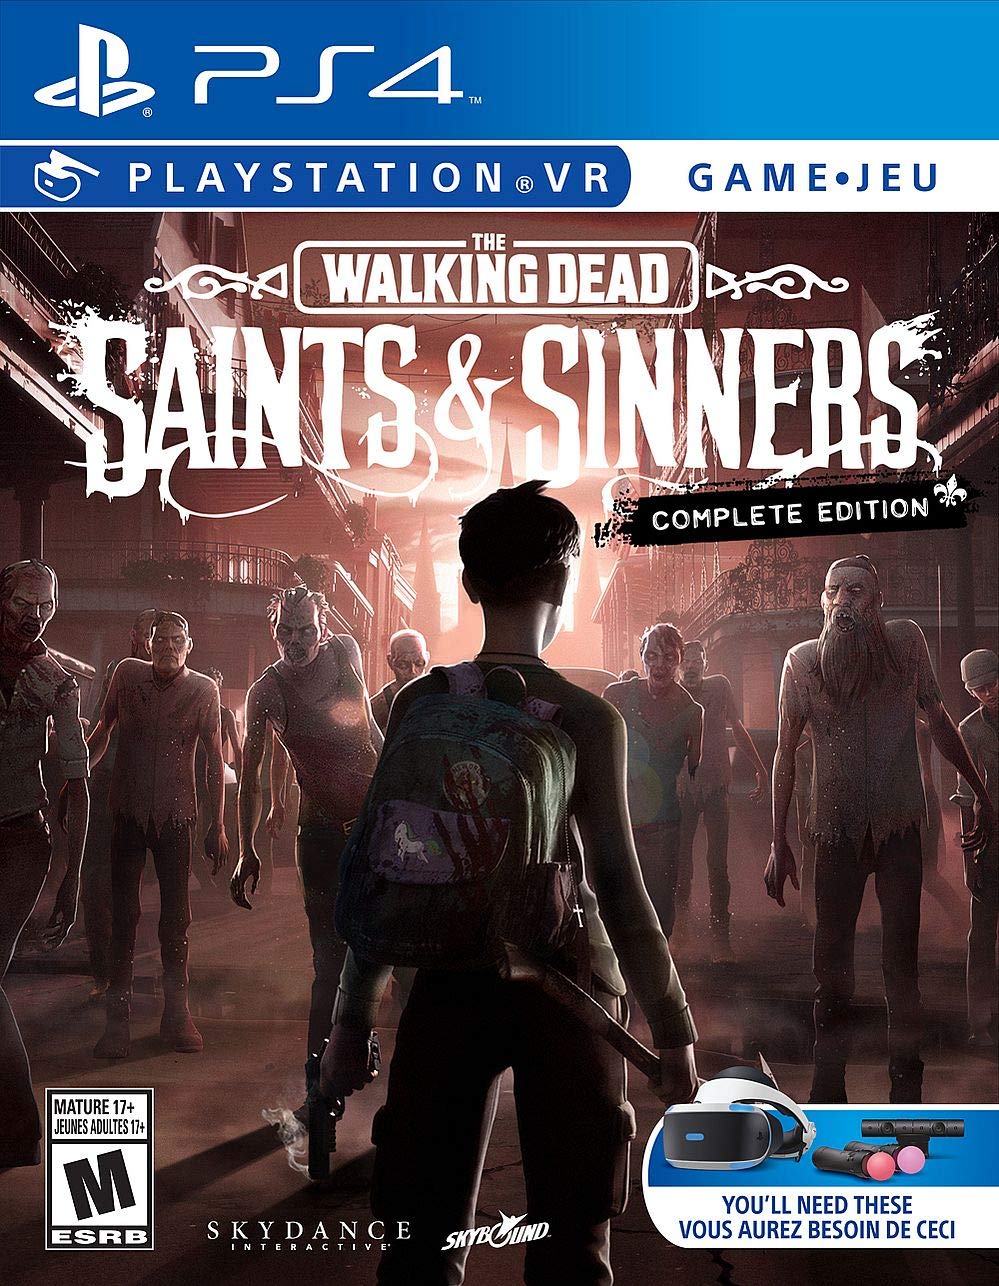 The Walking Dead: Saints & Sinners - The Complete Edition (PSVR/PS4) $19.99 - Amazon